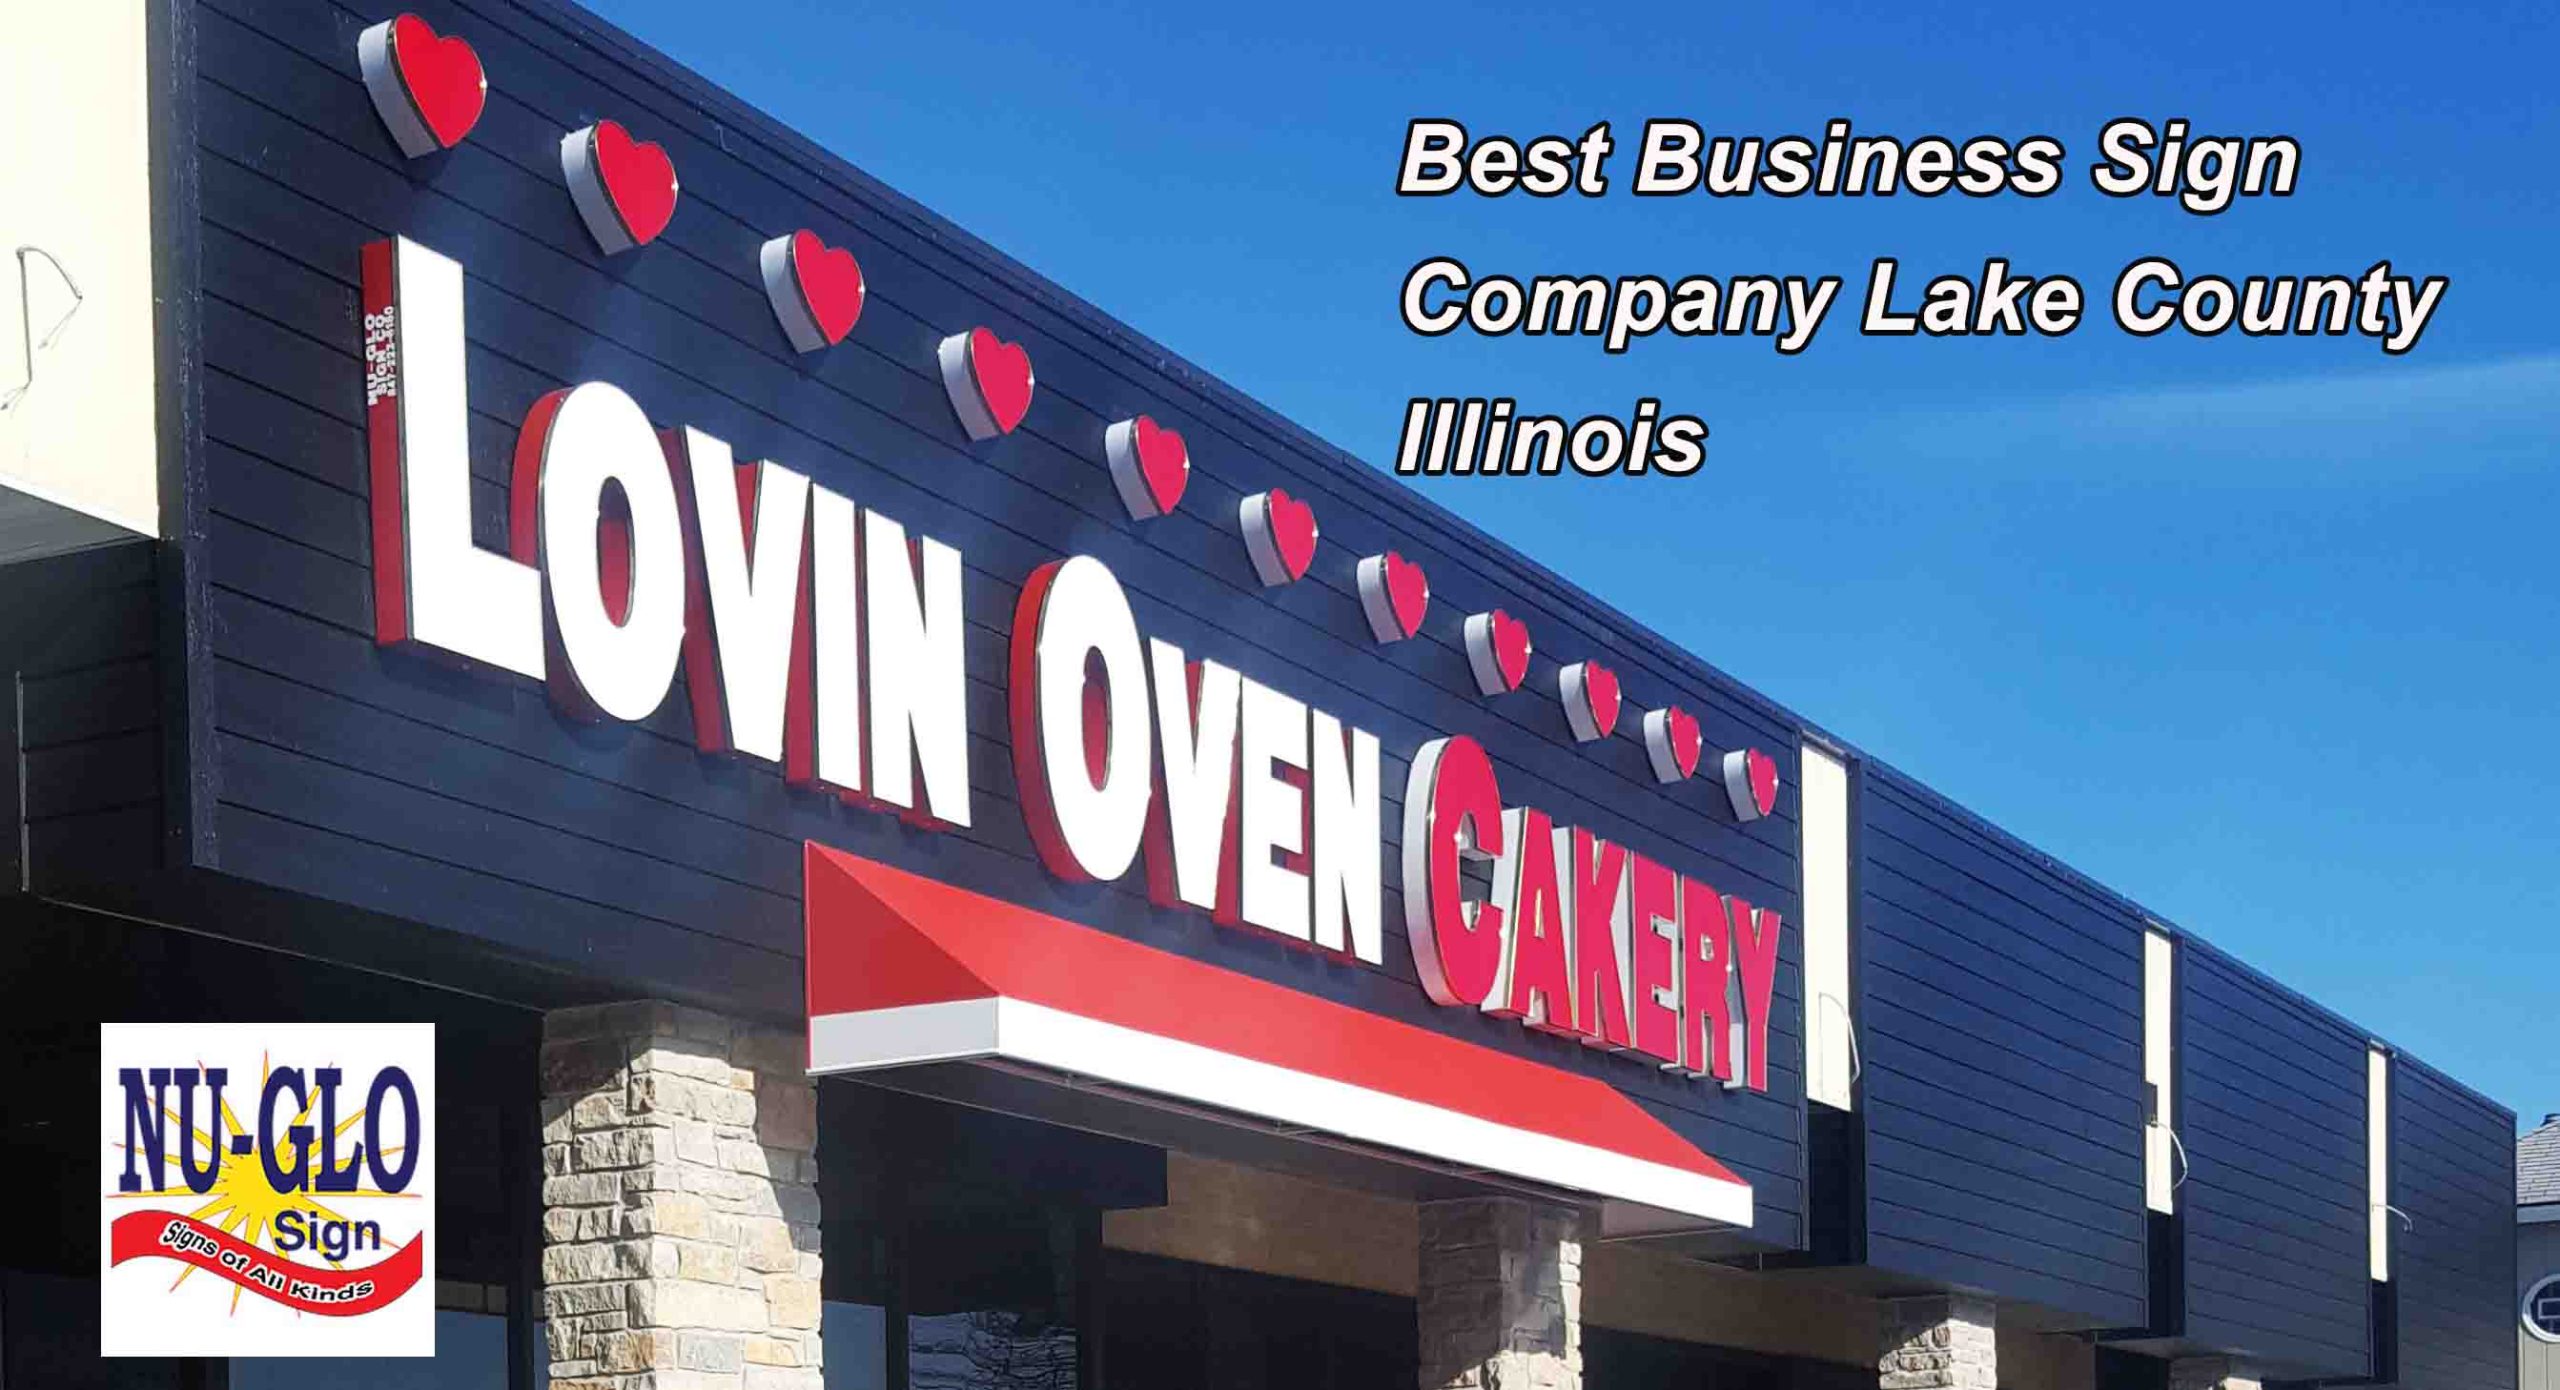 Best Business Sign Company Lake County Illinois